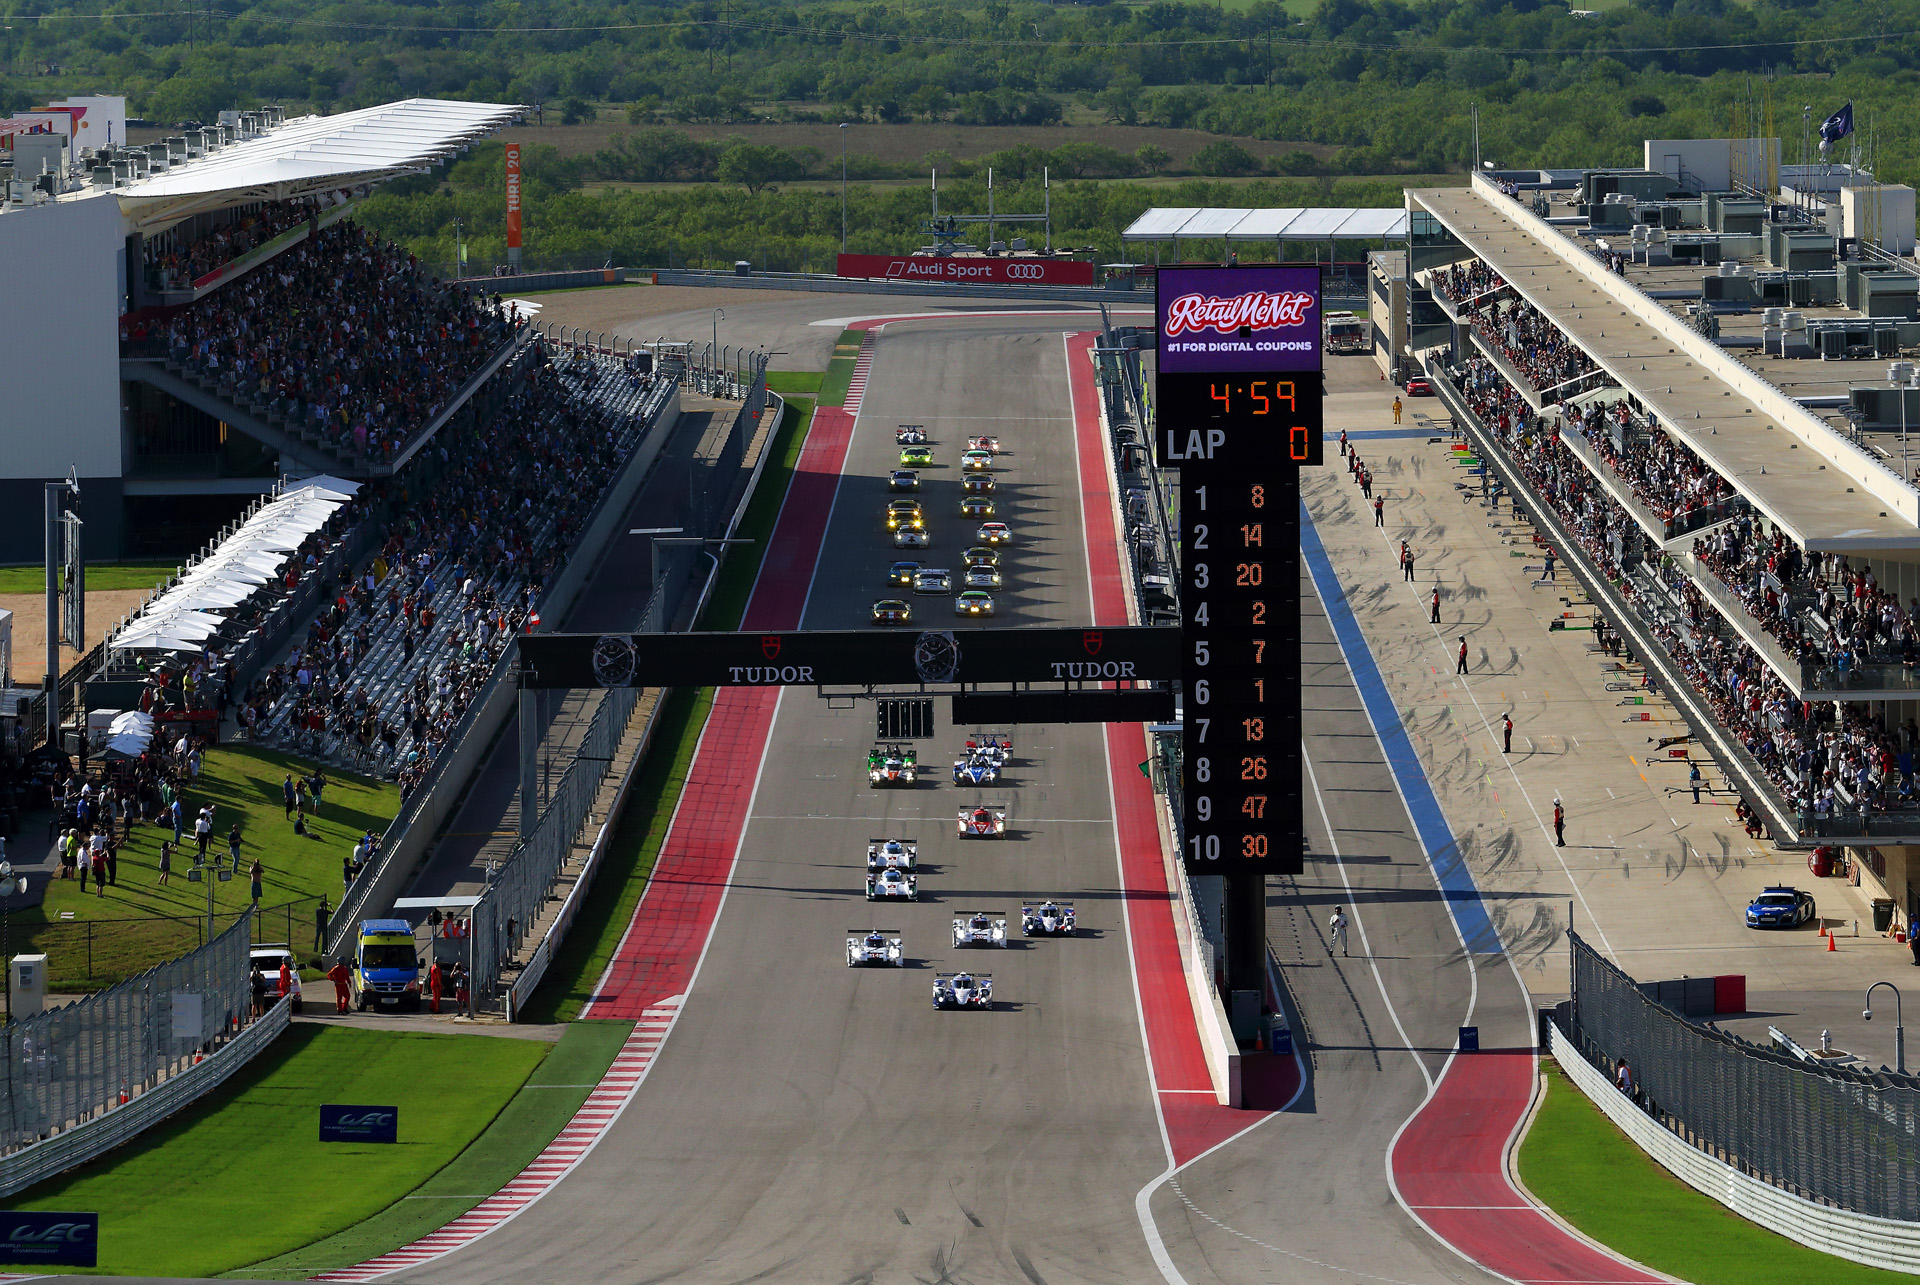 2015 WEC Round 5 Circuit of the Americas Preview